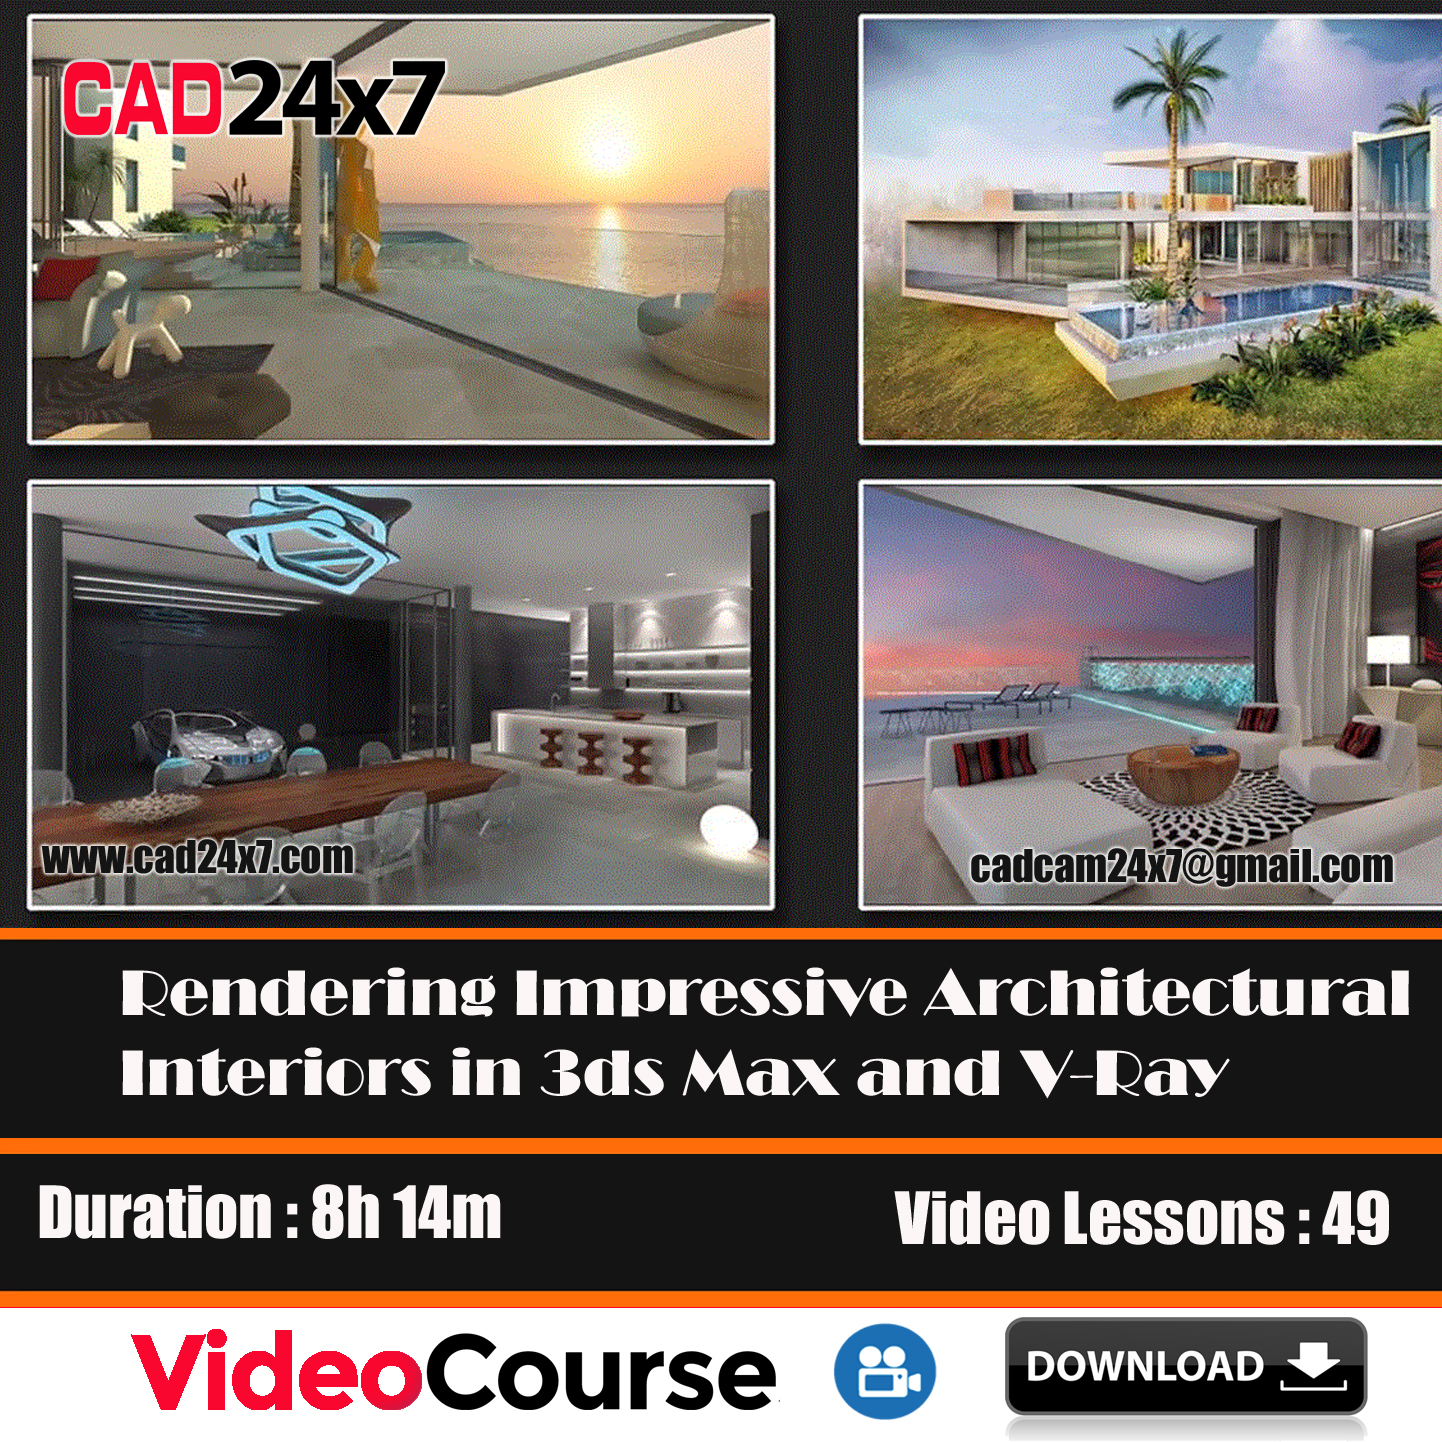 Rendering Impressive Interiors in 3ds Max and V-Ray Video Course Download